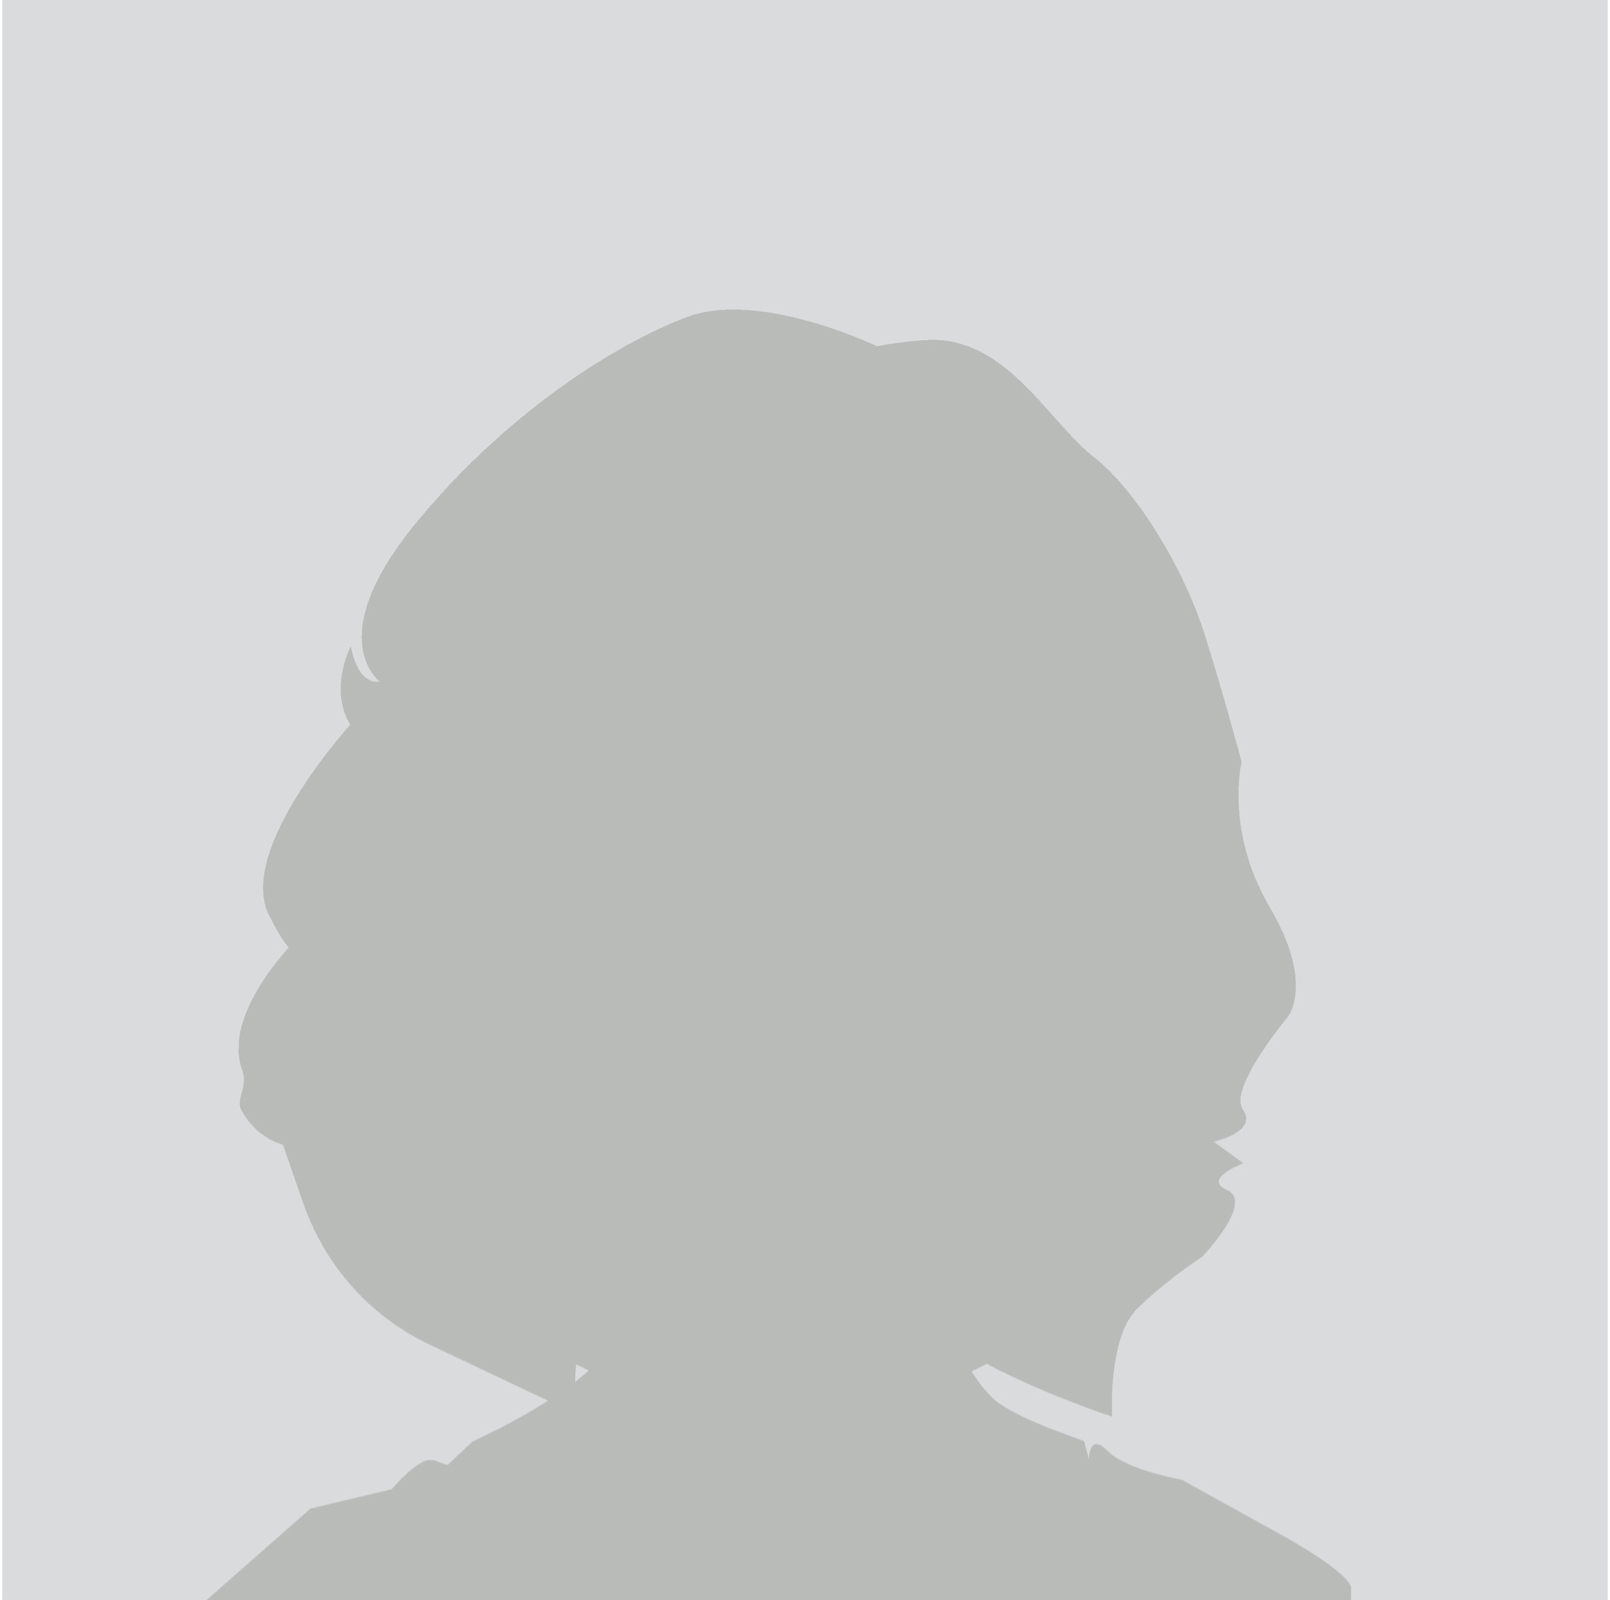 Default avatar profile icon. Gray placeholder. Man and woman